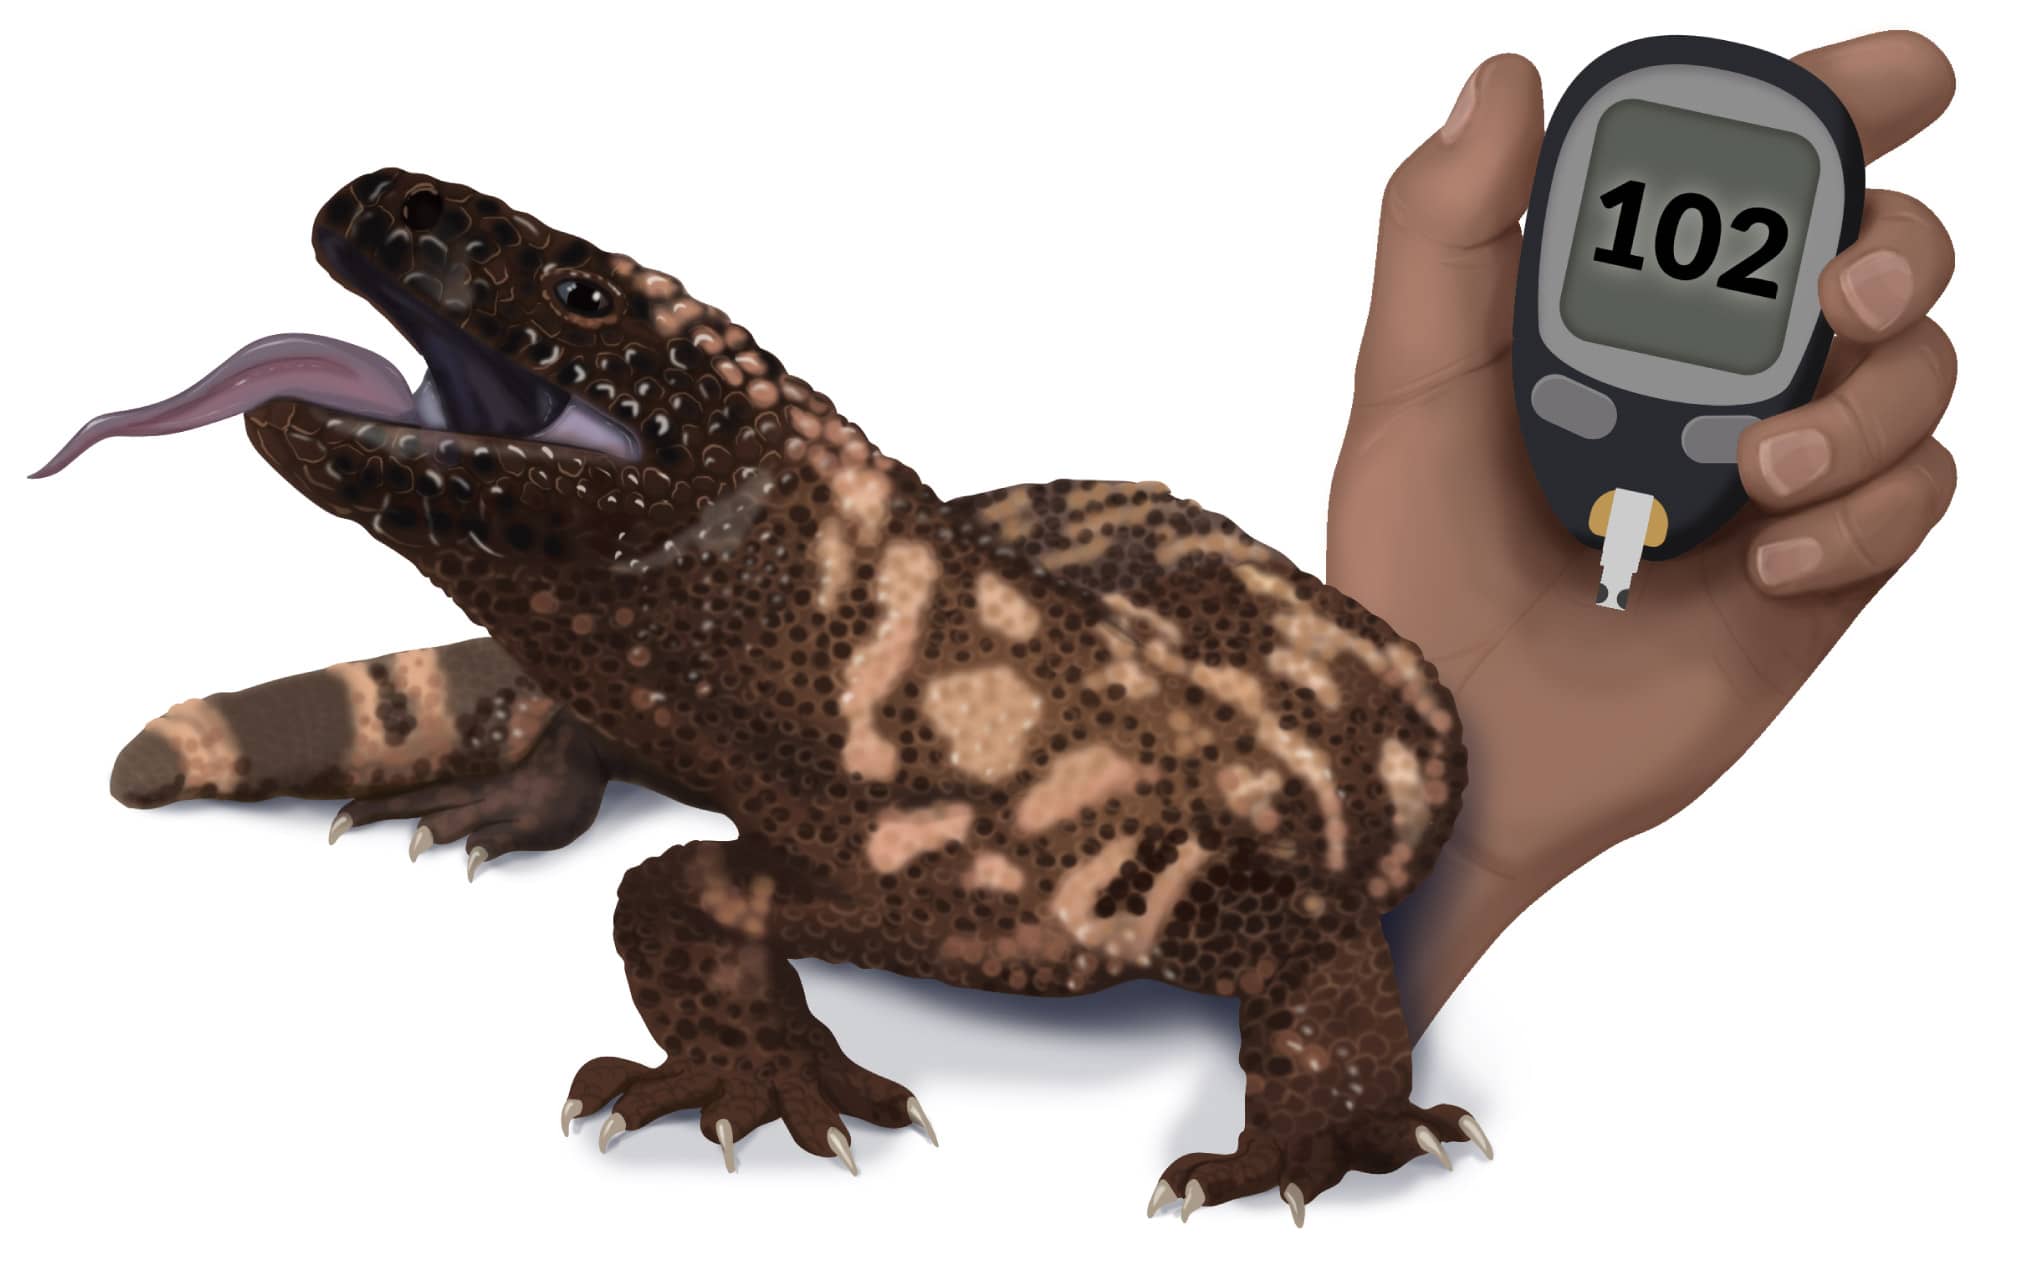 the Gila monster next to a diabetic blood sugar meter